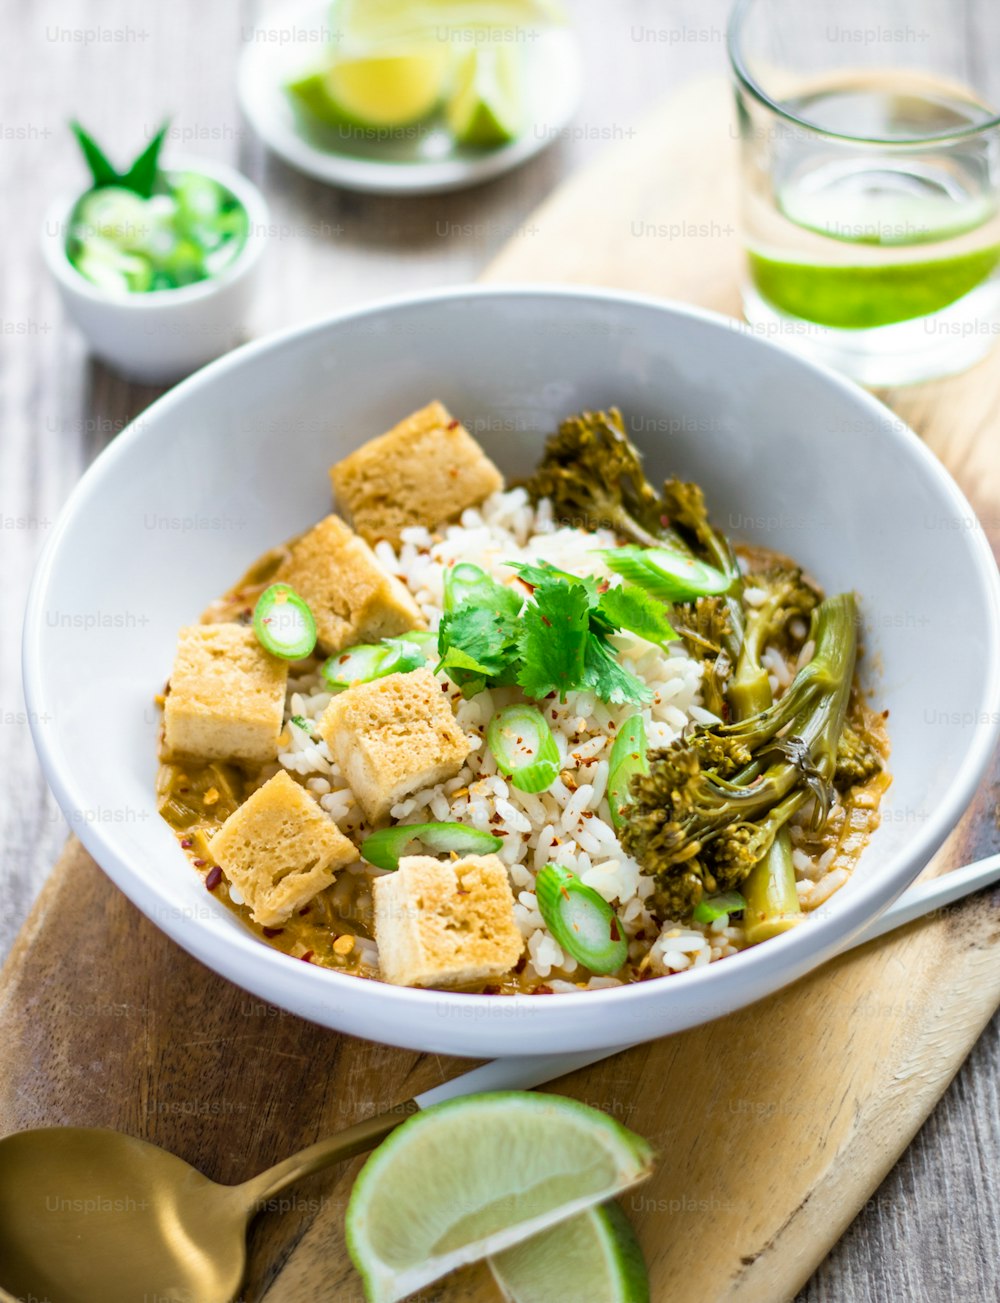 a bowl filled with rice, broccoli and tofu